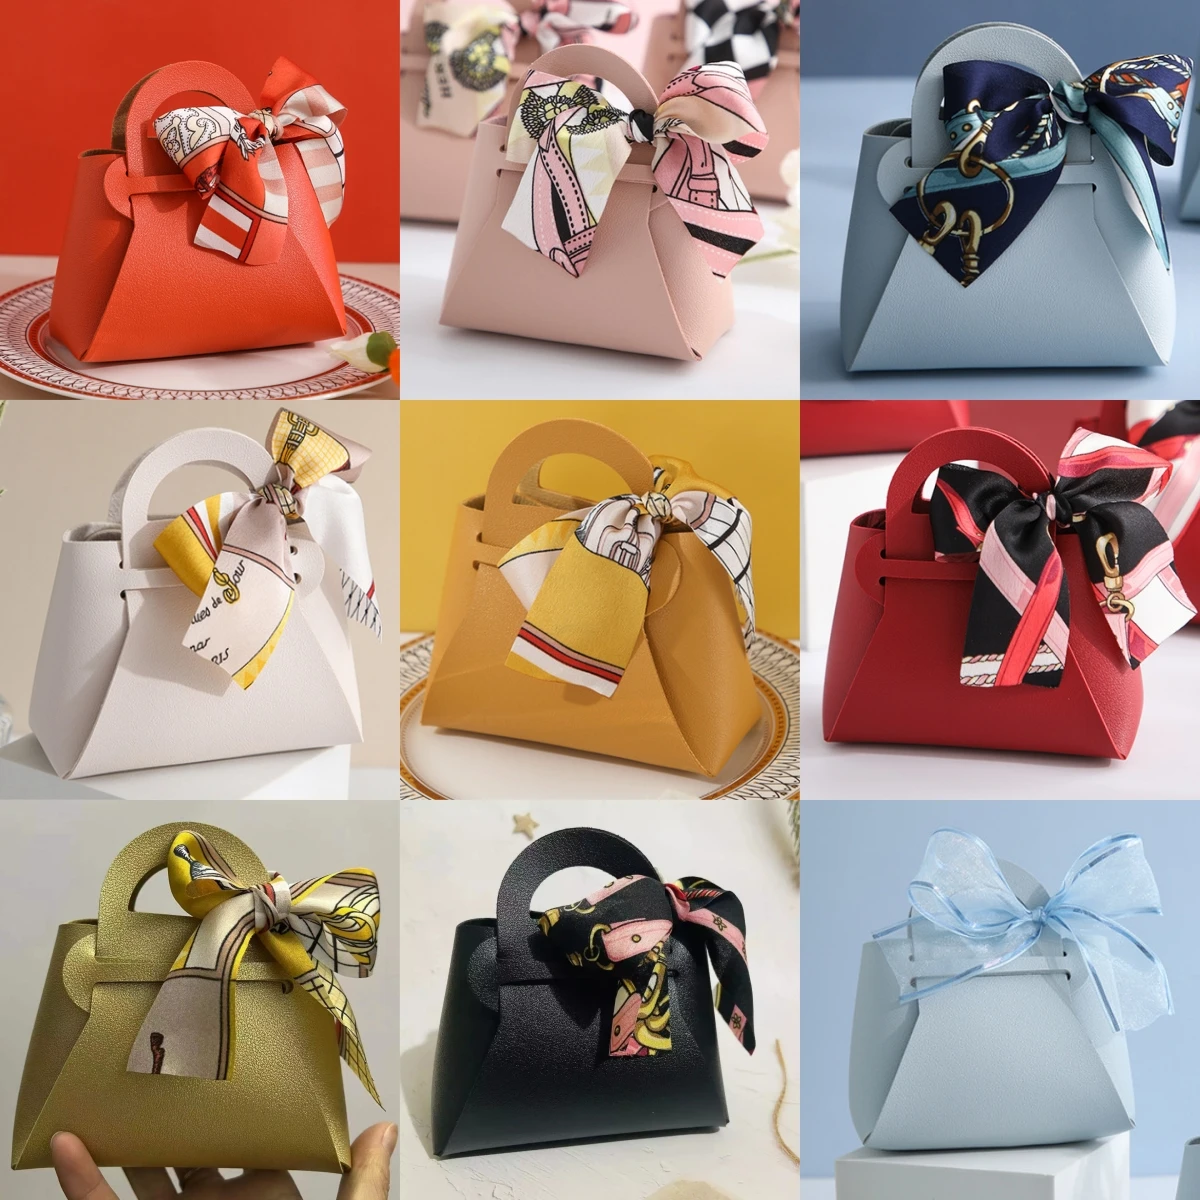 60pcs Leather Gift Bags for Easter Eid Wedding Guest Favour Box Mini Handbag With Ribbon Packaging Box Distributions Party Gifts